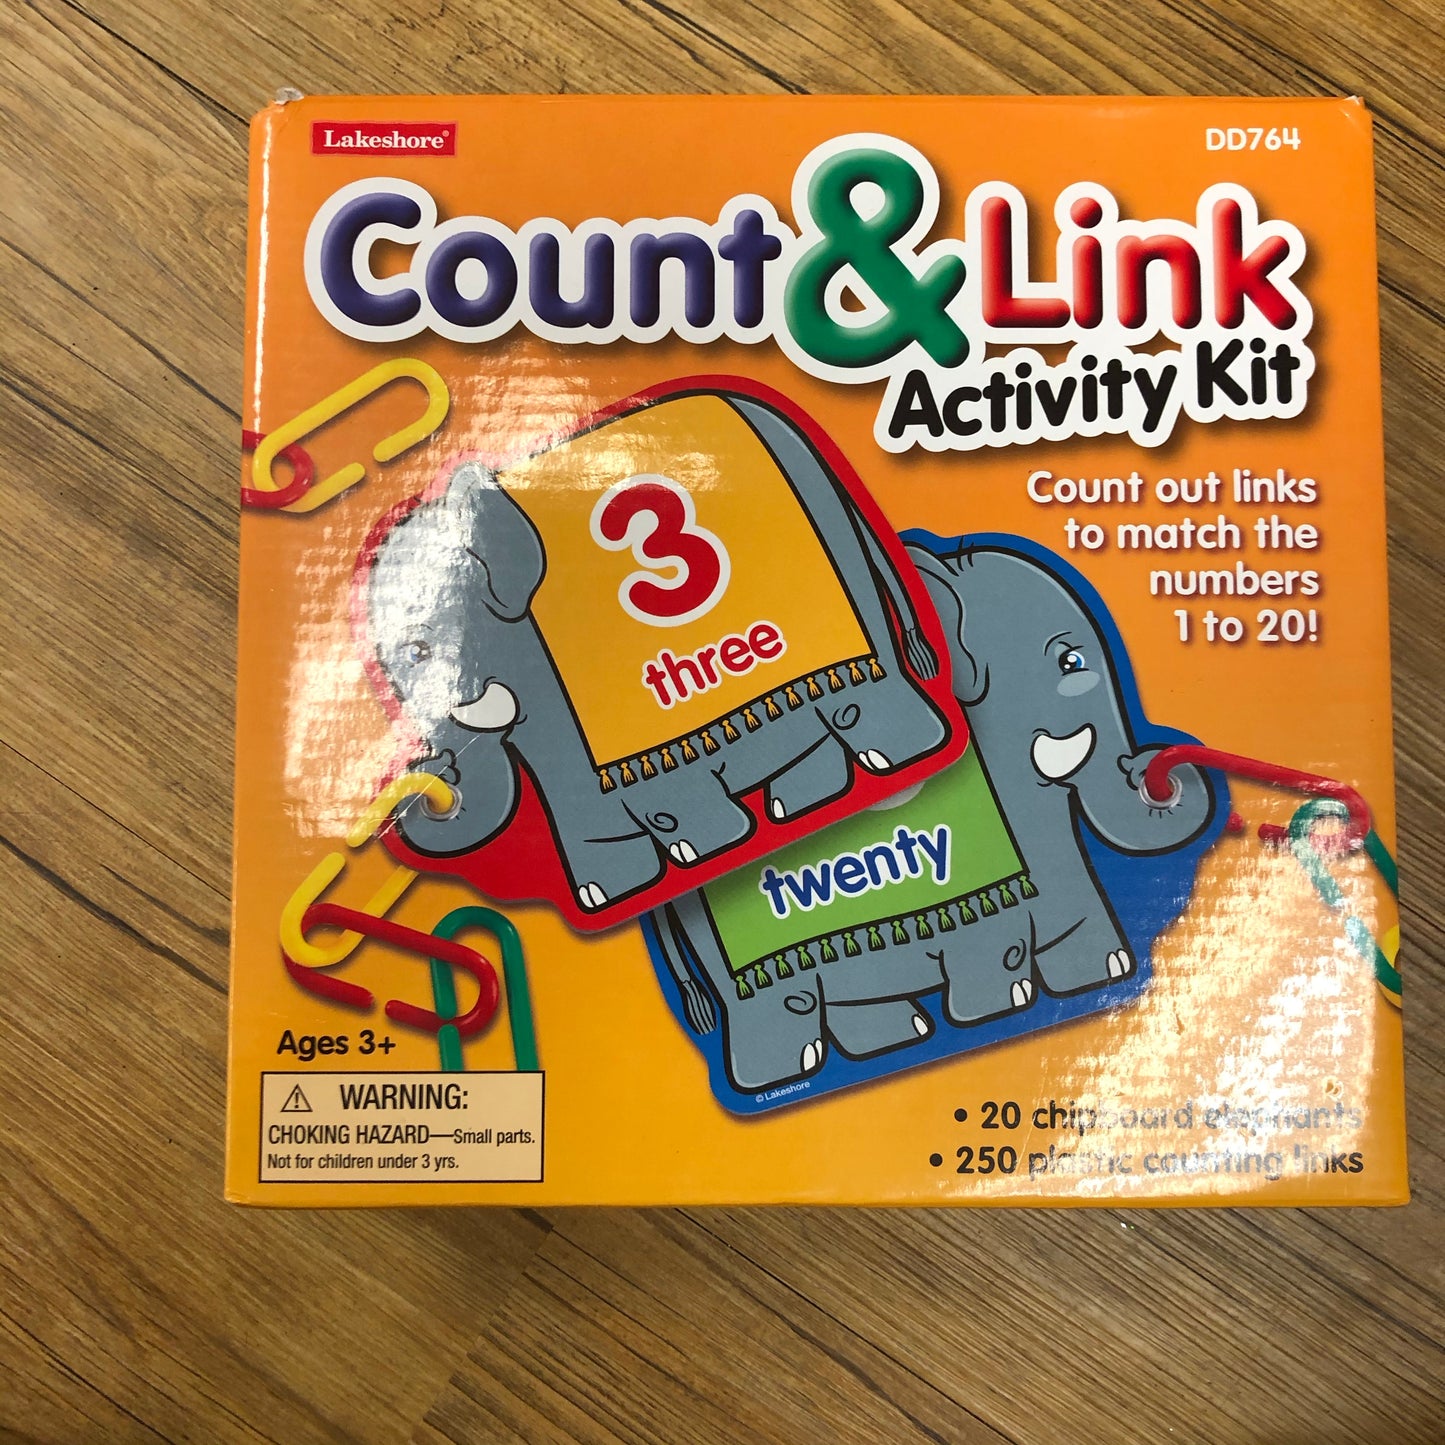 Count & Link Activity Kit